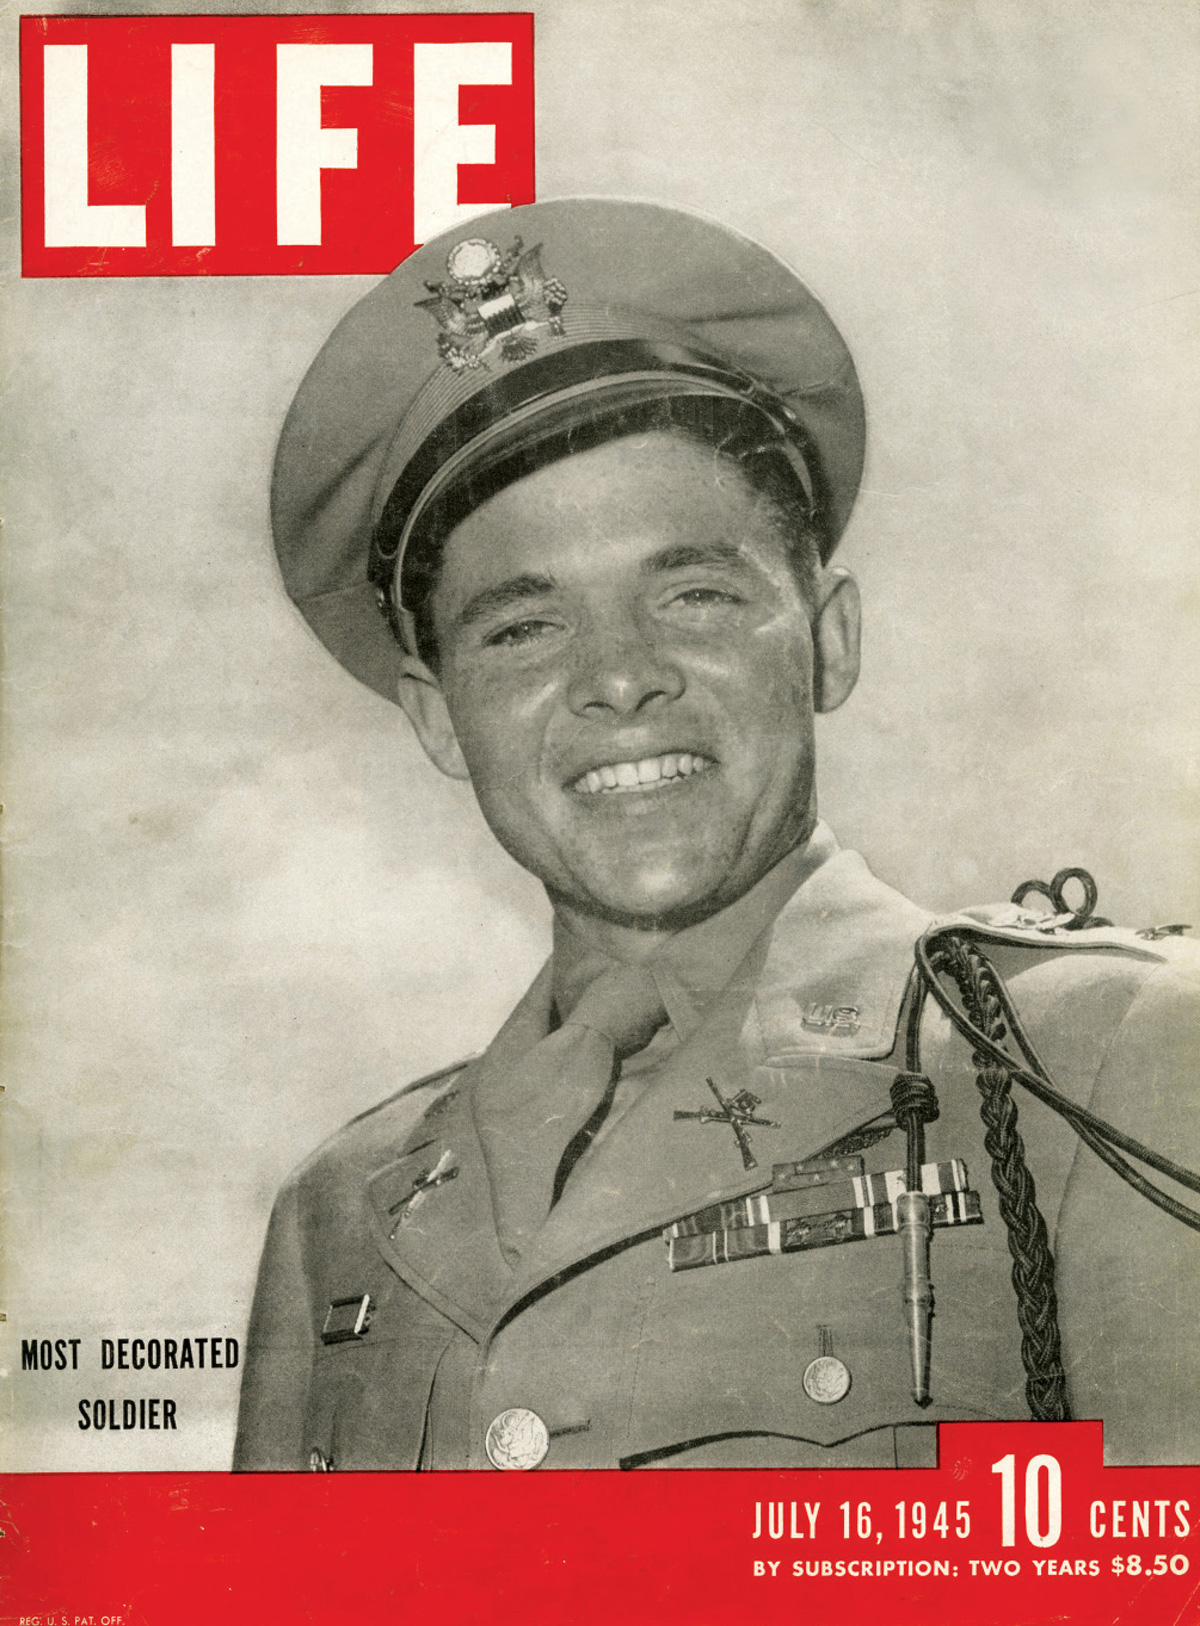 Audie Murphy on the cover of Life, 16 July 1945. “Most Decorated Soldier Comes Home to the Little Town of Farmsville, Texas.”